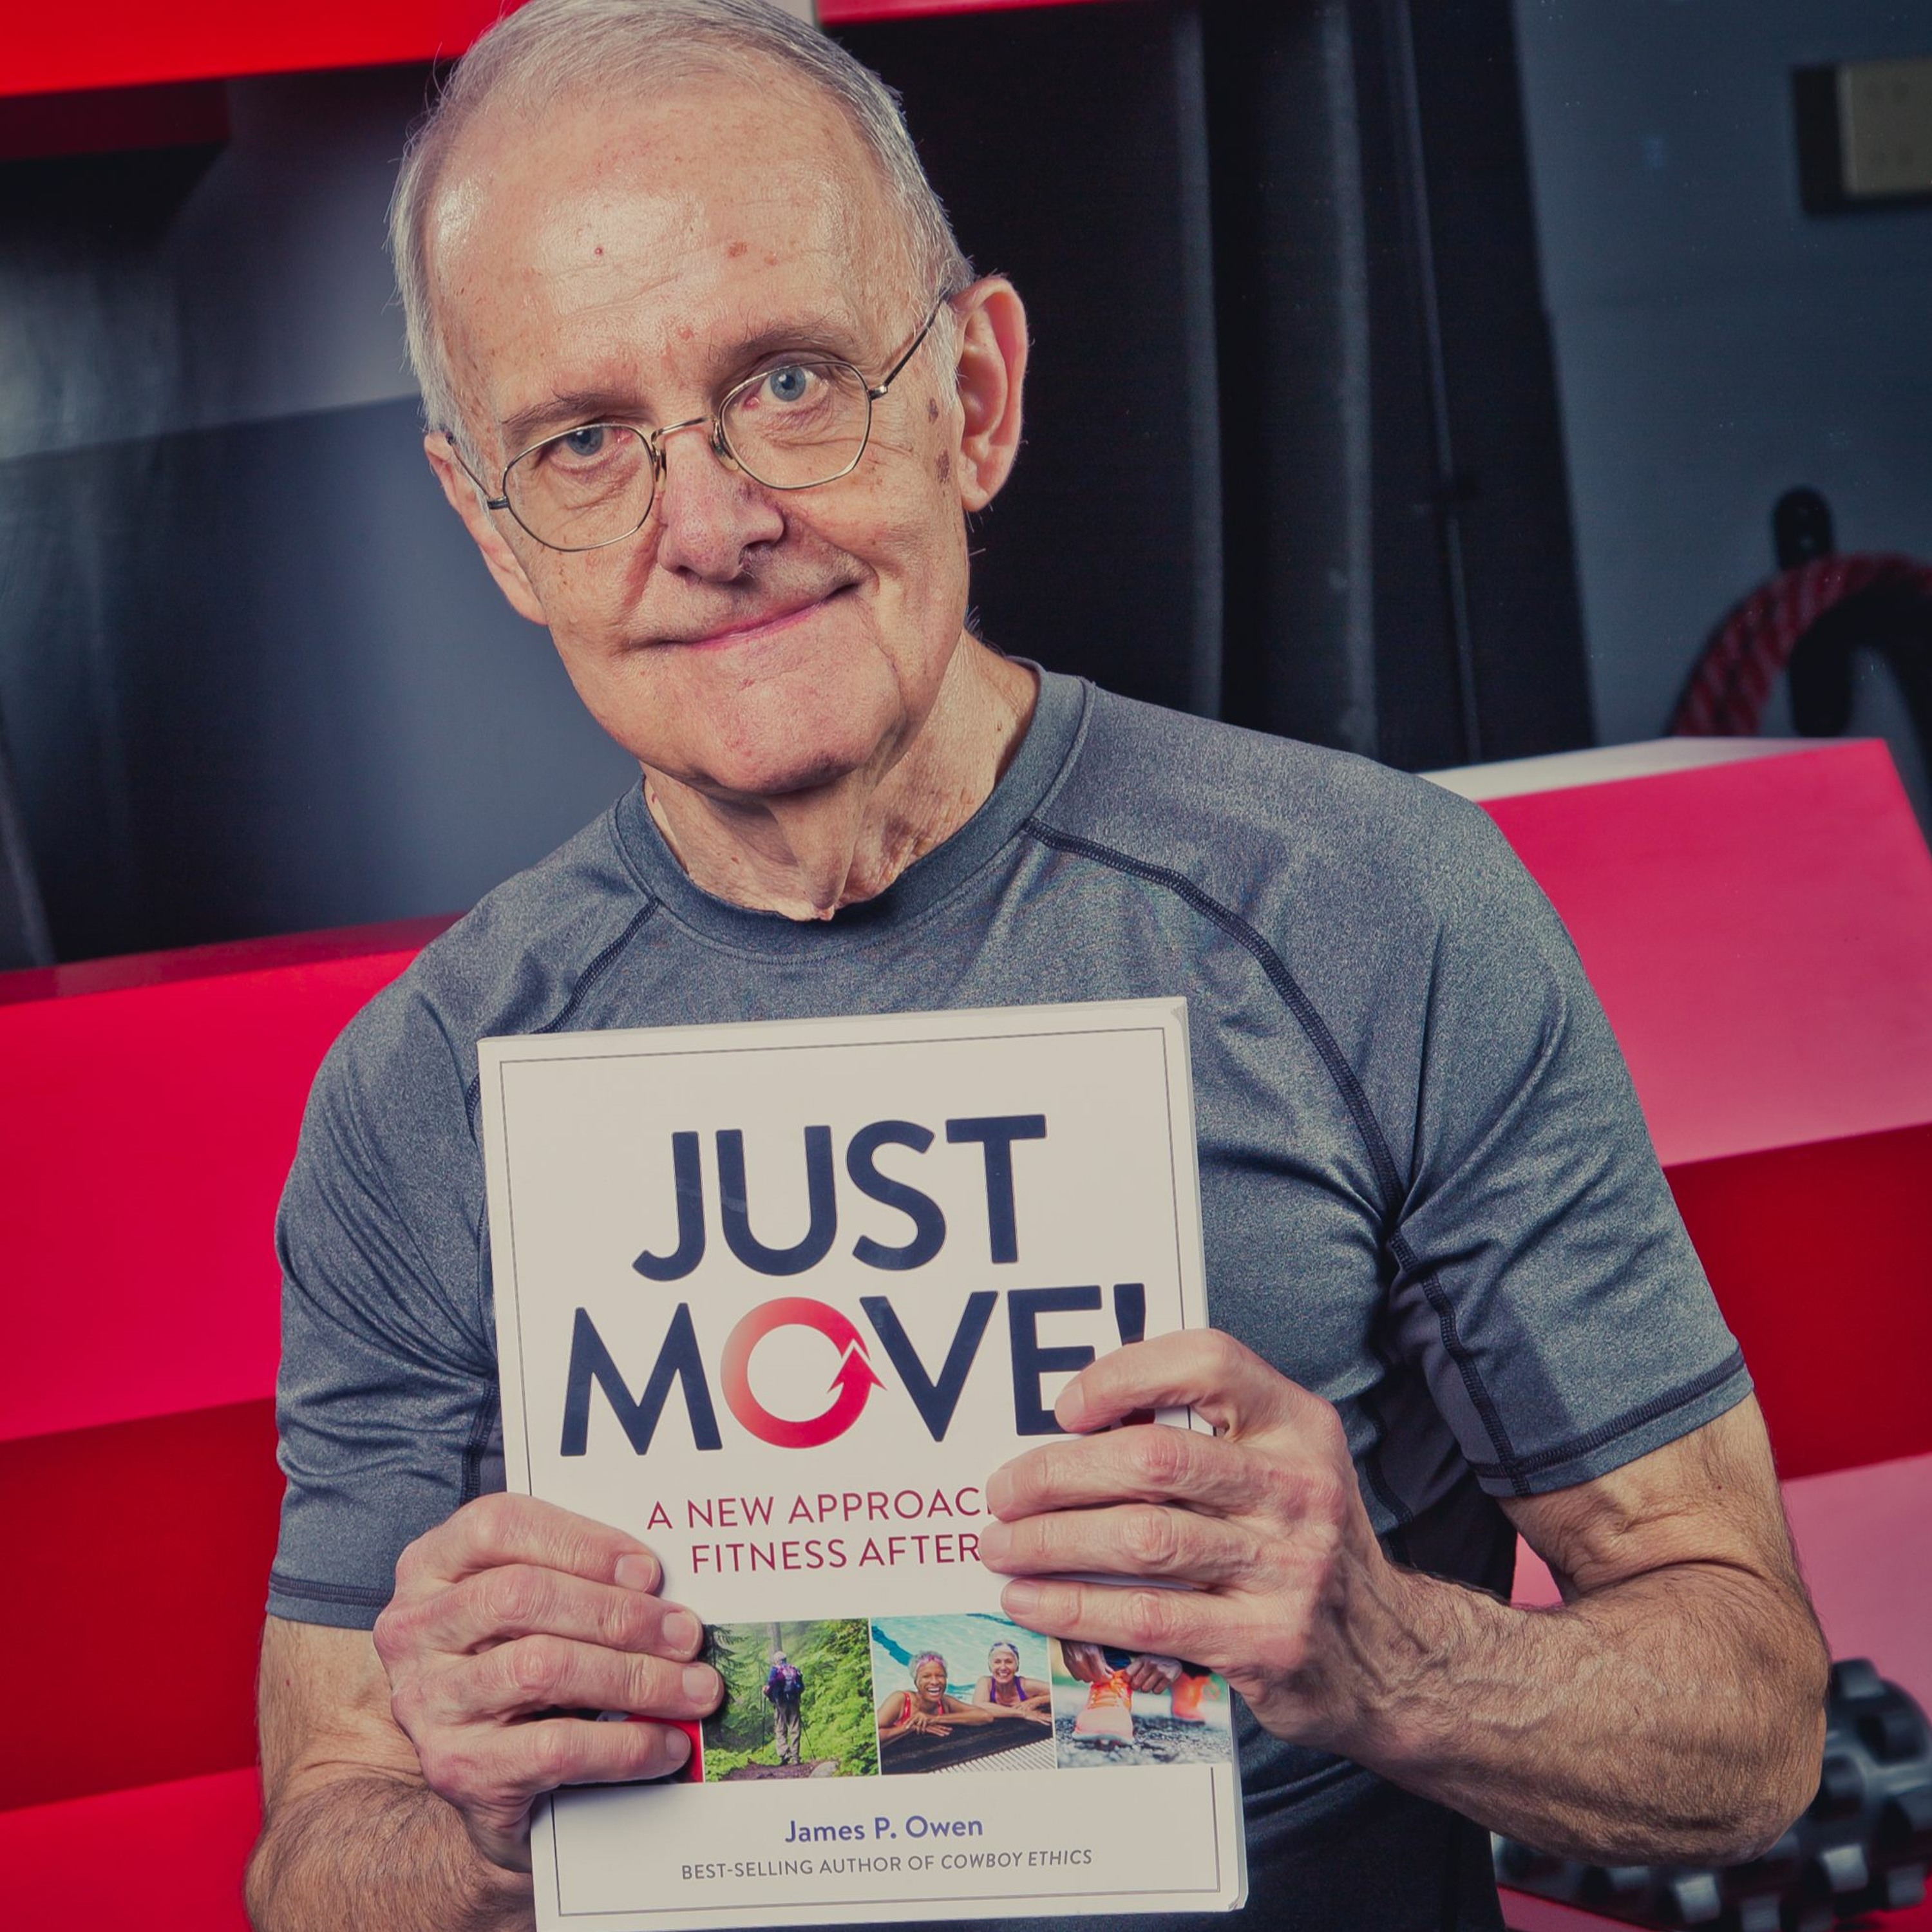 It’s Never Too Late To Reap The Rewards Of Living A Healthy Lifestyle with James P. Owen